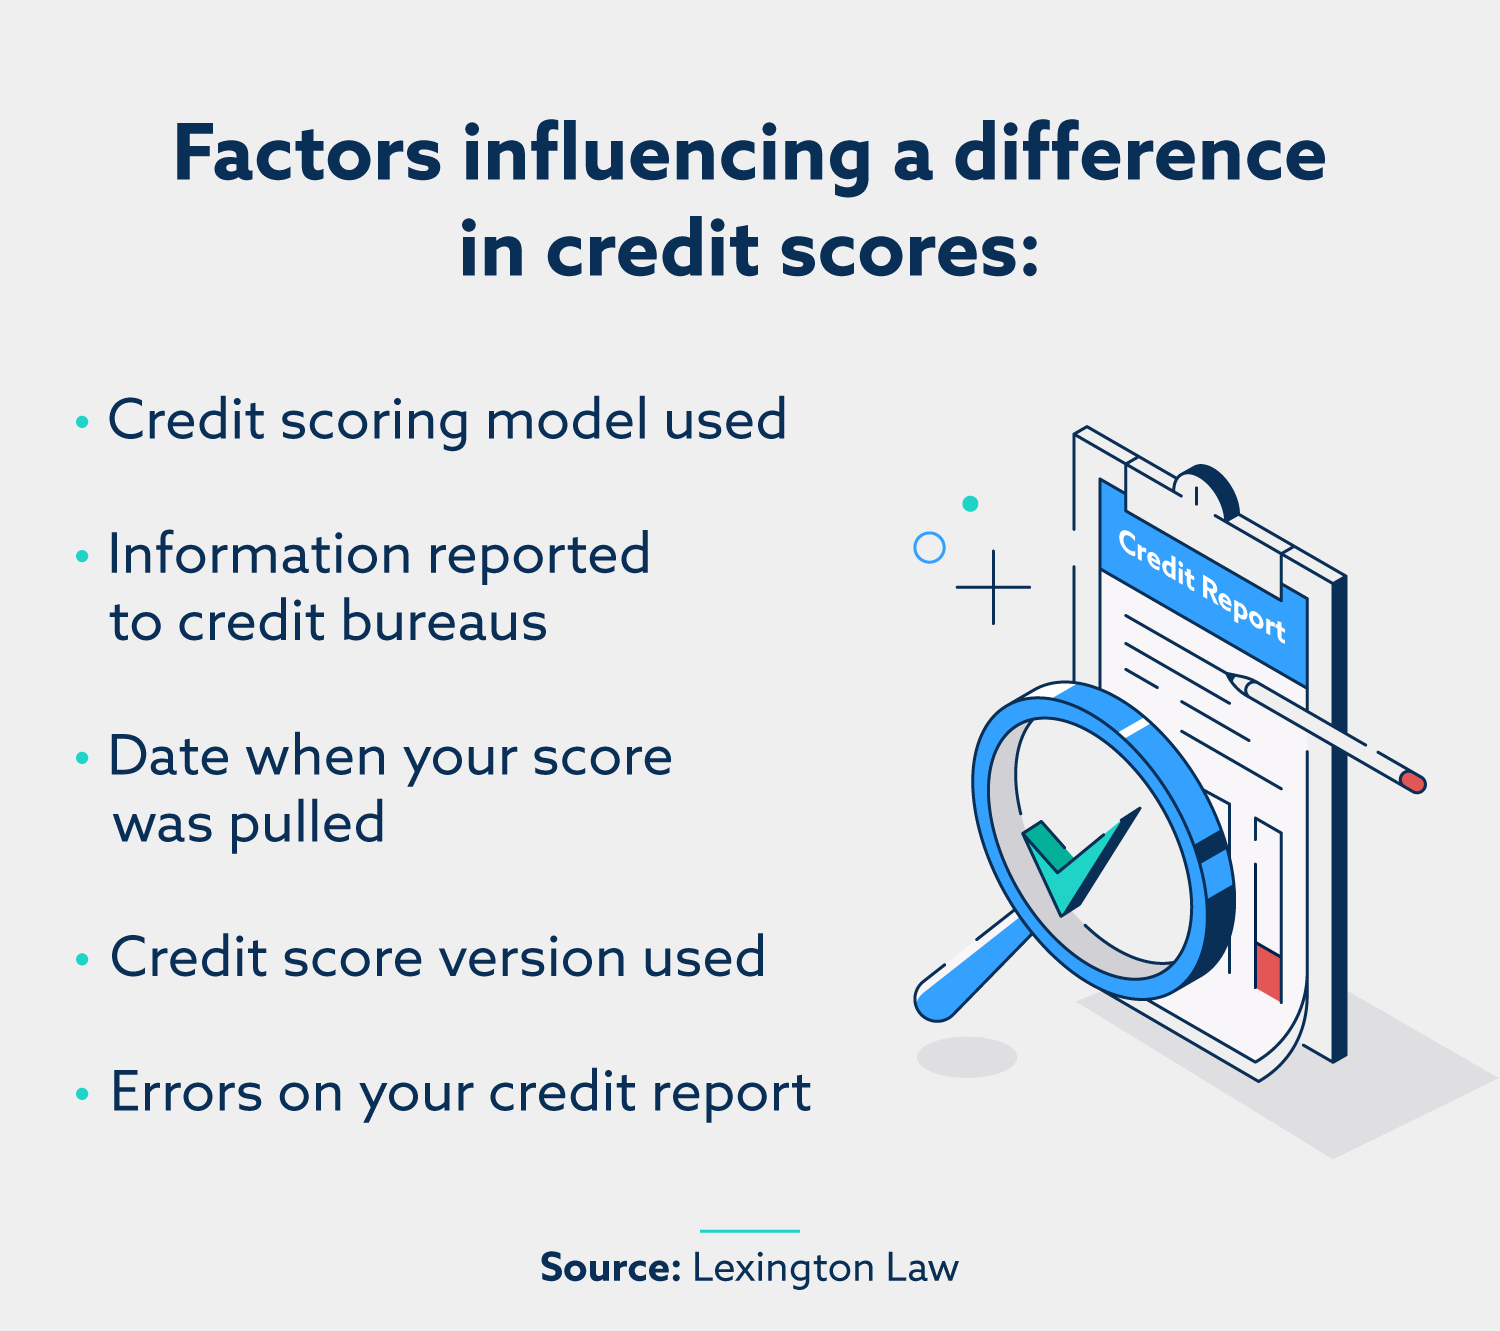 Factors influencing a difference in credit scores: credit scoring model  used, information reported to credit bureaus, date when your score was pulled, credit score version used, errors on your credit report.